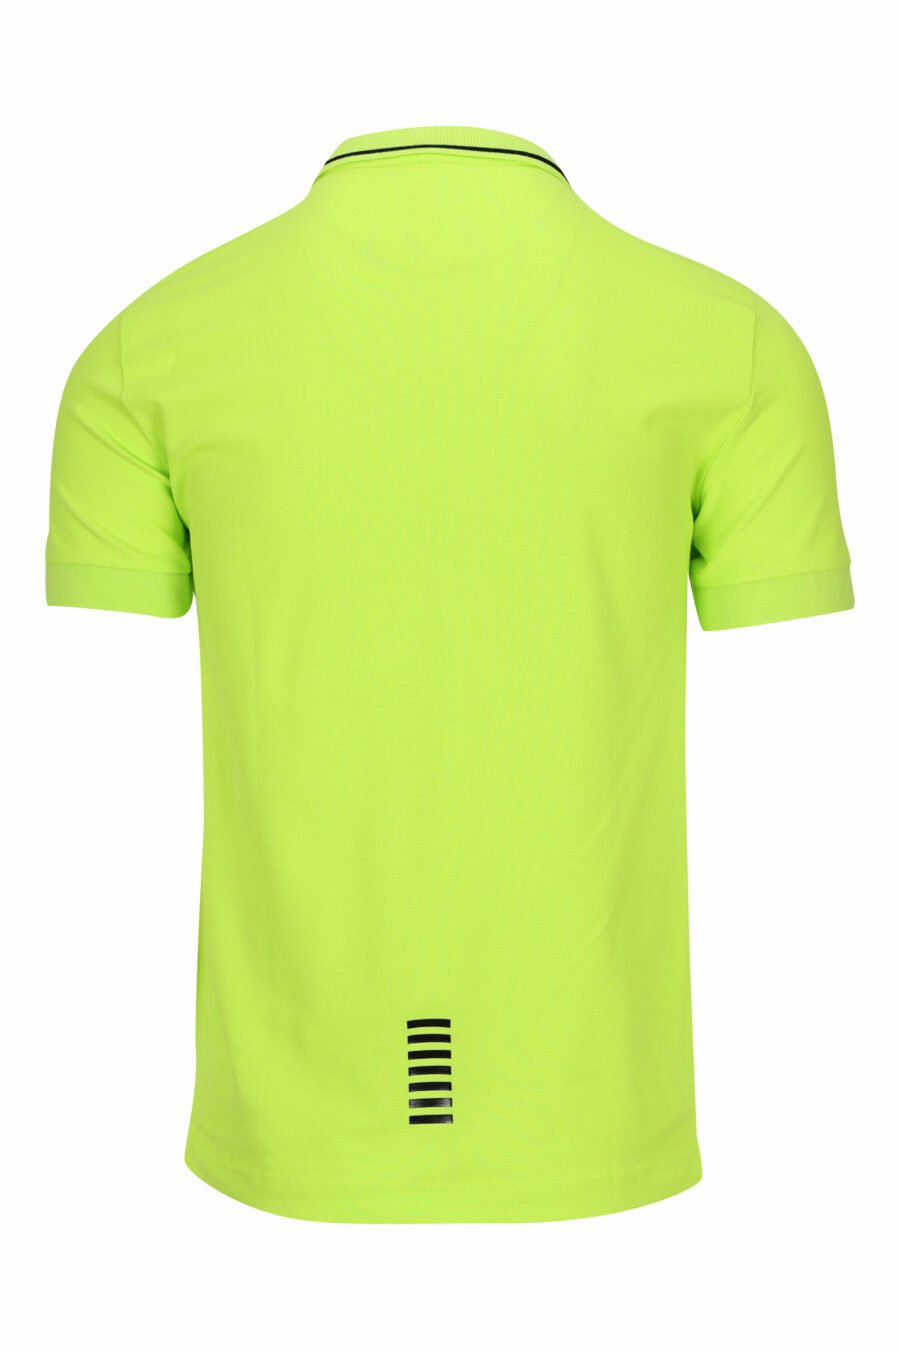 Lime green polo shirt with "lux identity" minilogue and white lines on collar - 8058947503650 1